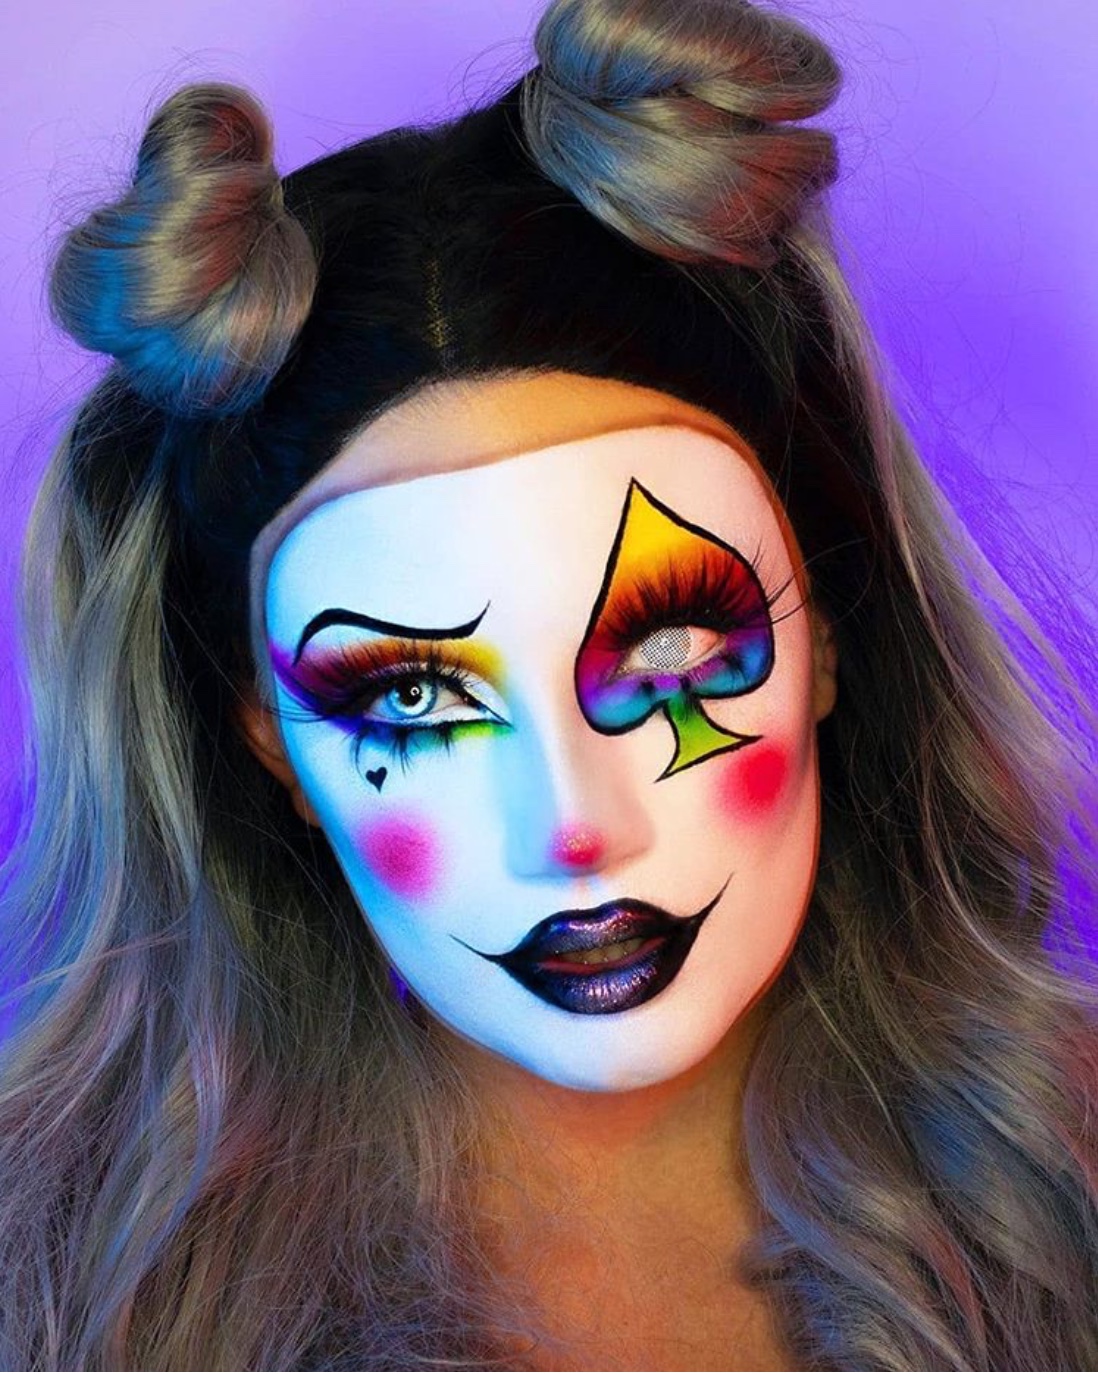 30+ Scary Halloween Makeup Looks Ideas For 2020 - The Glossychic